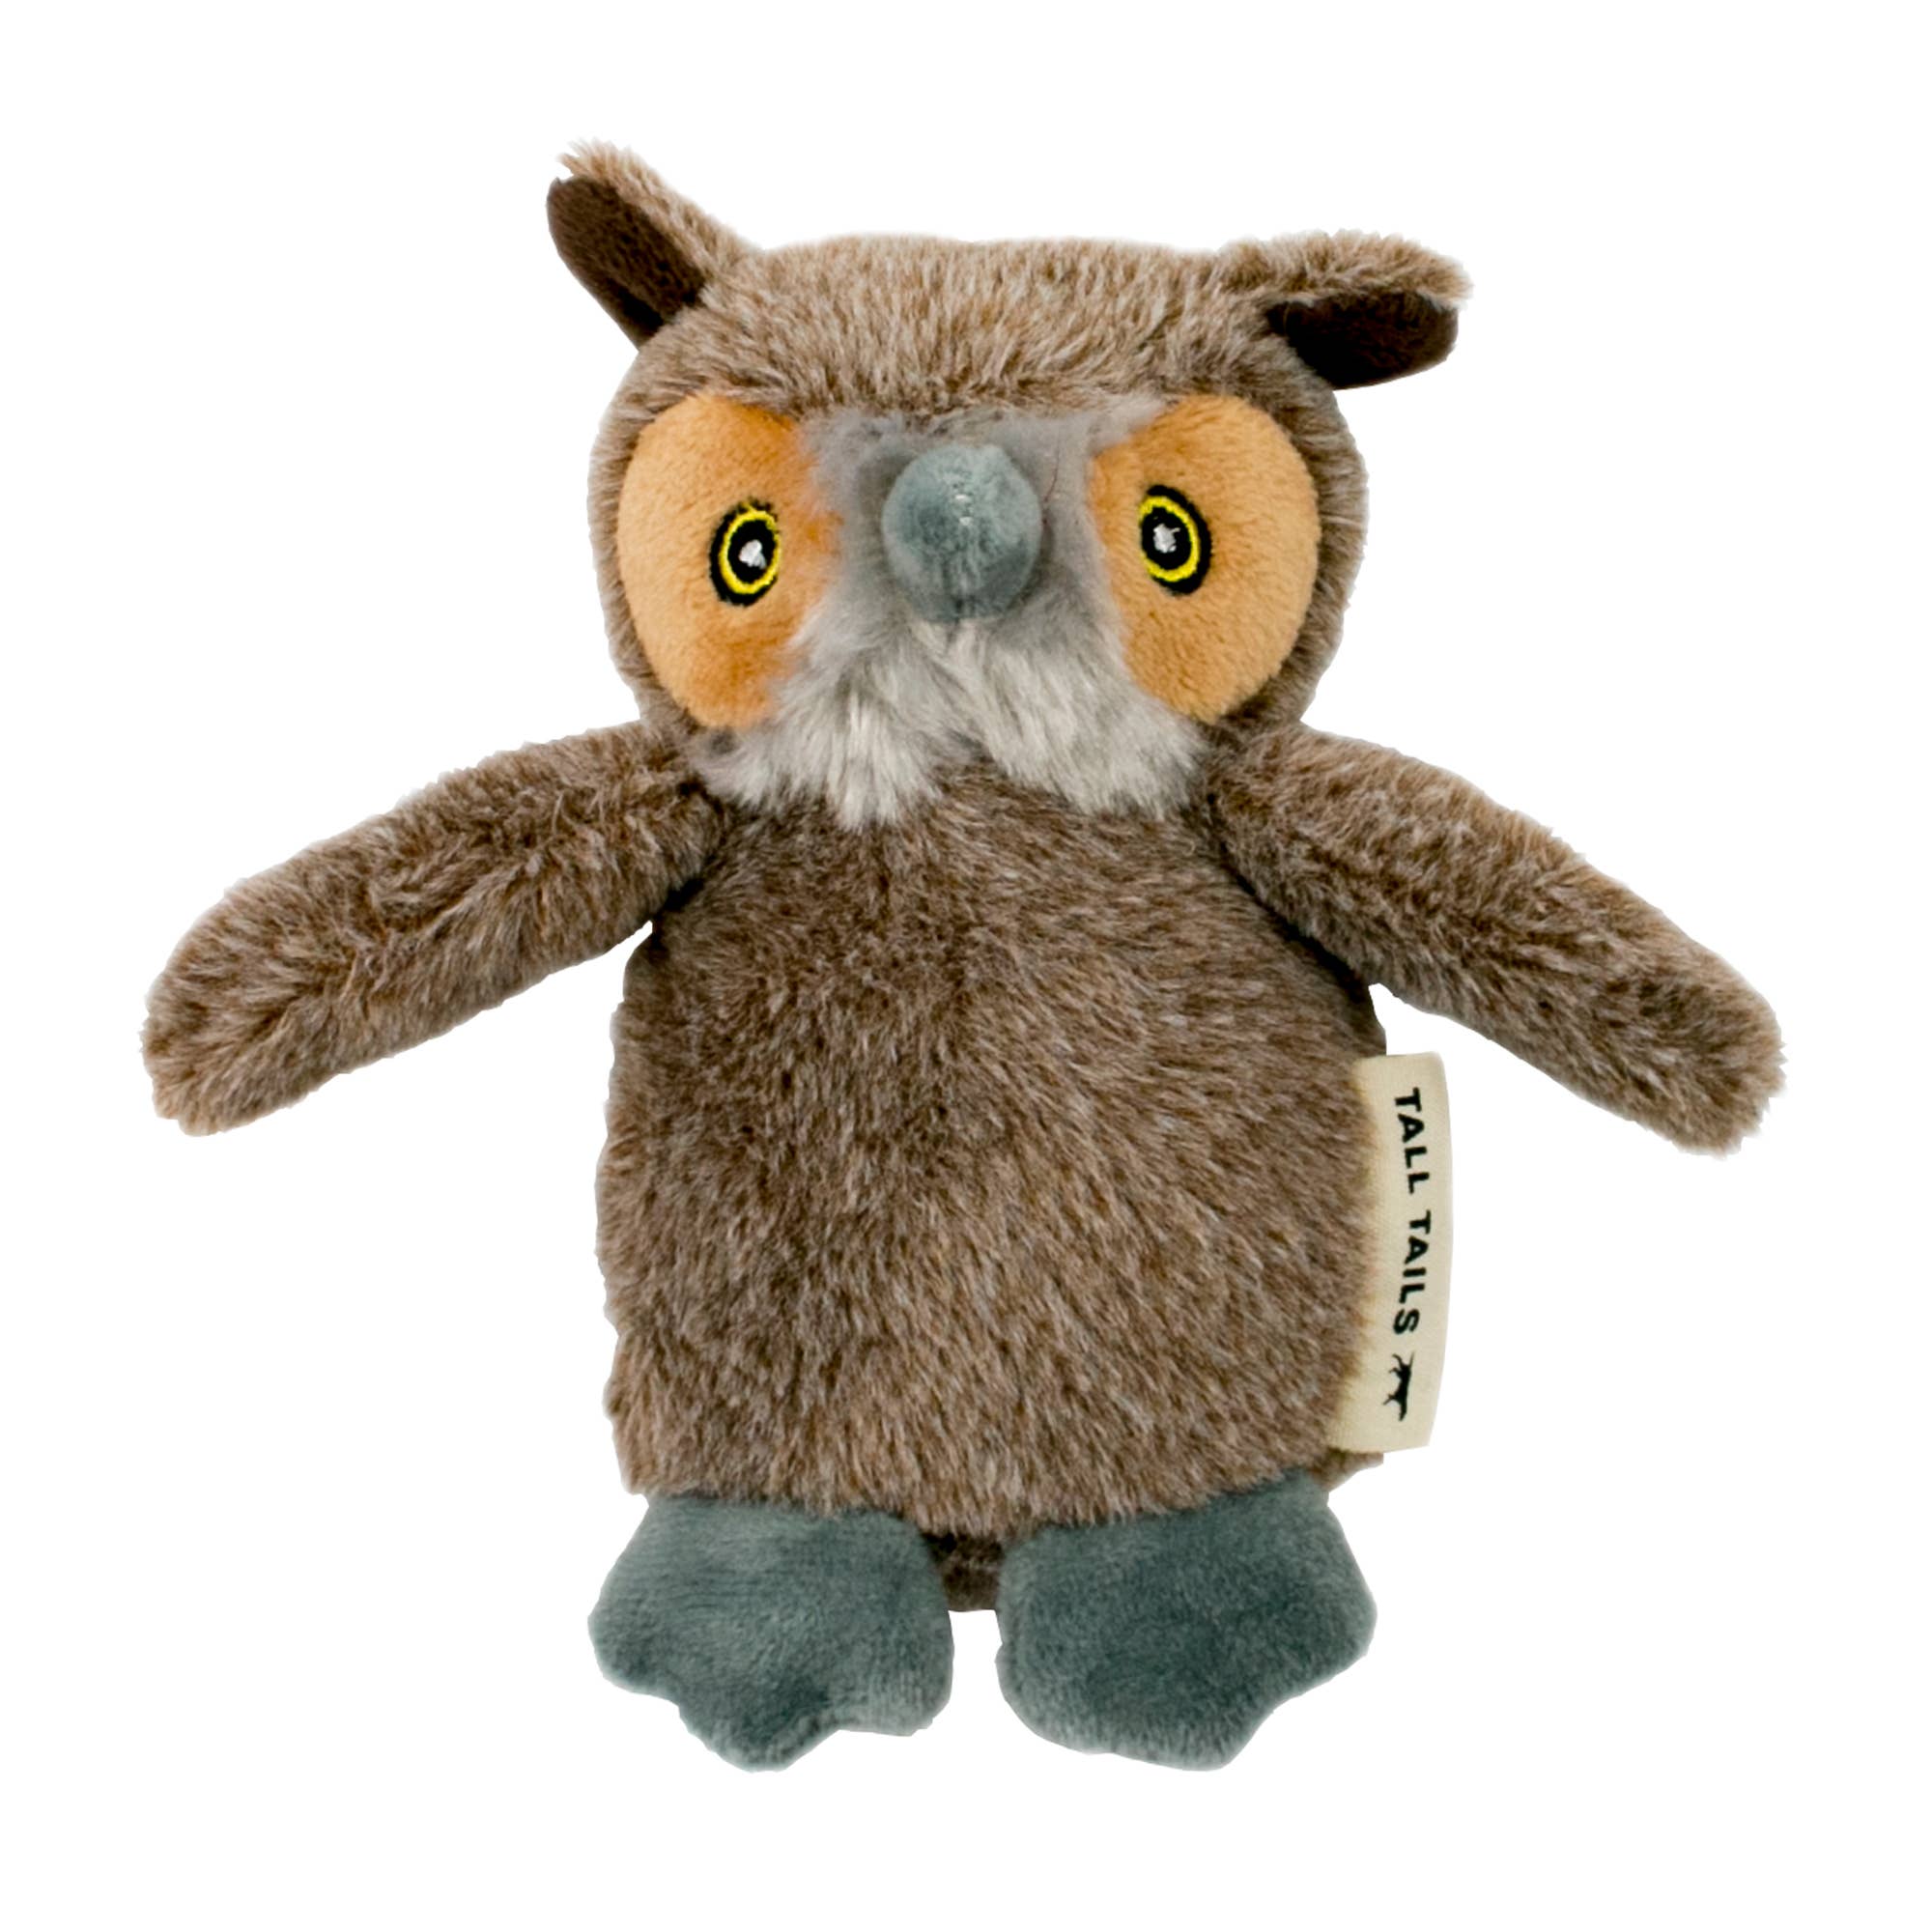 Tall Tails - 5" Plush Owl Squeaker Toy